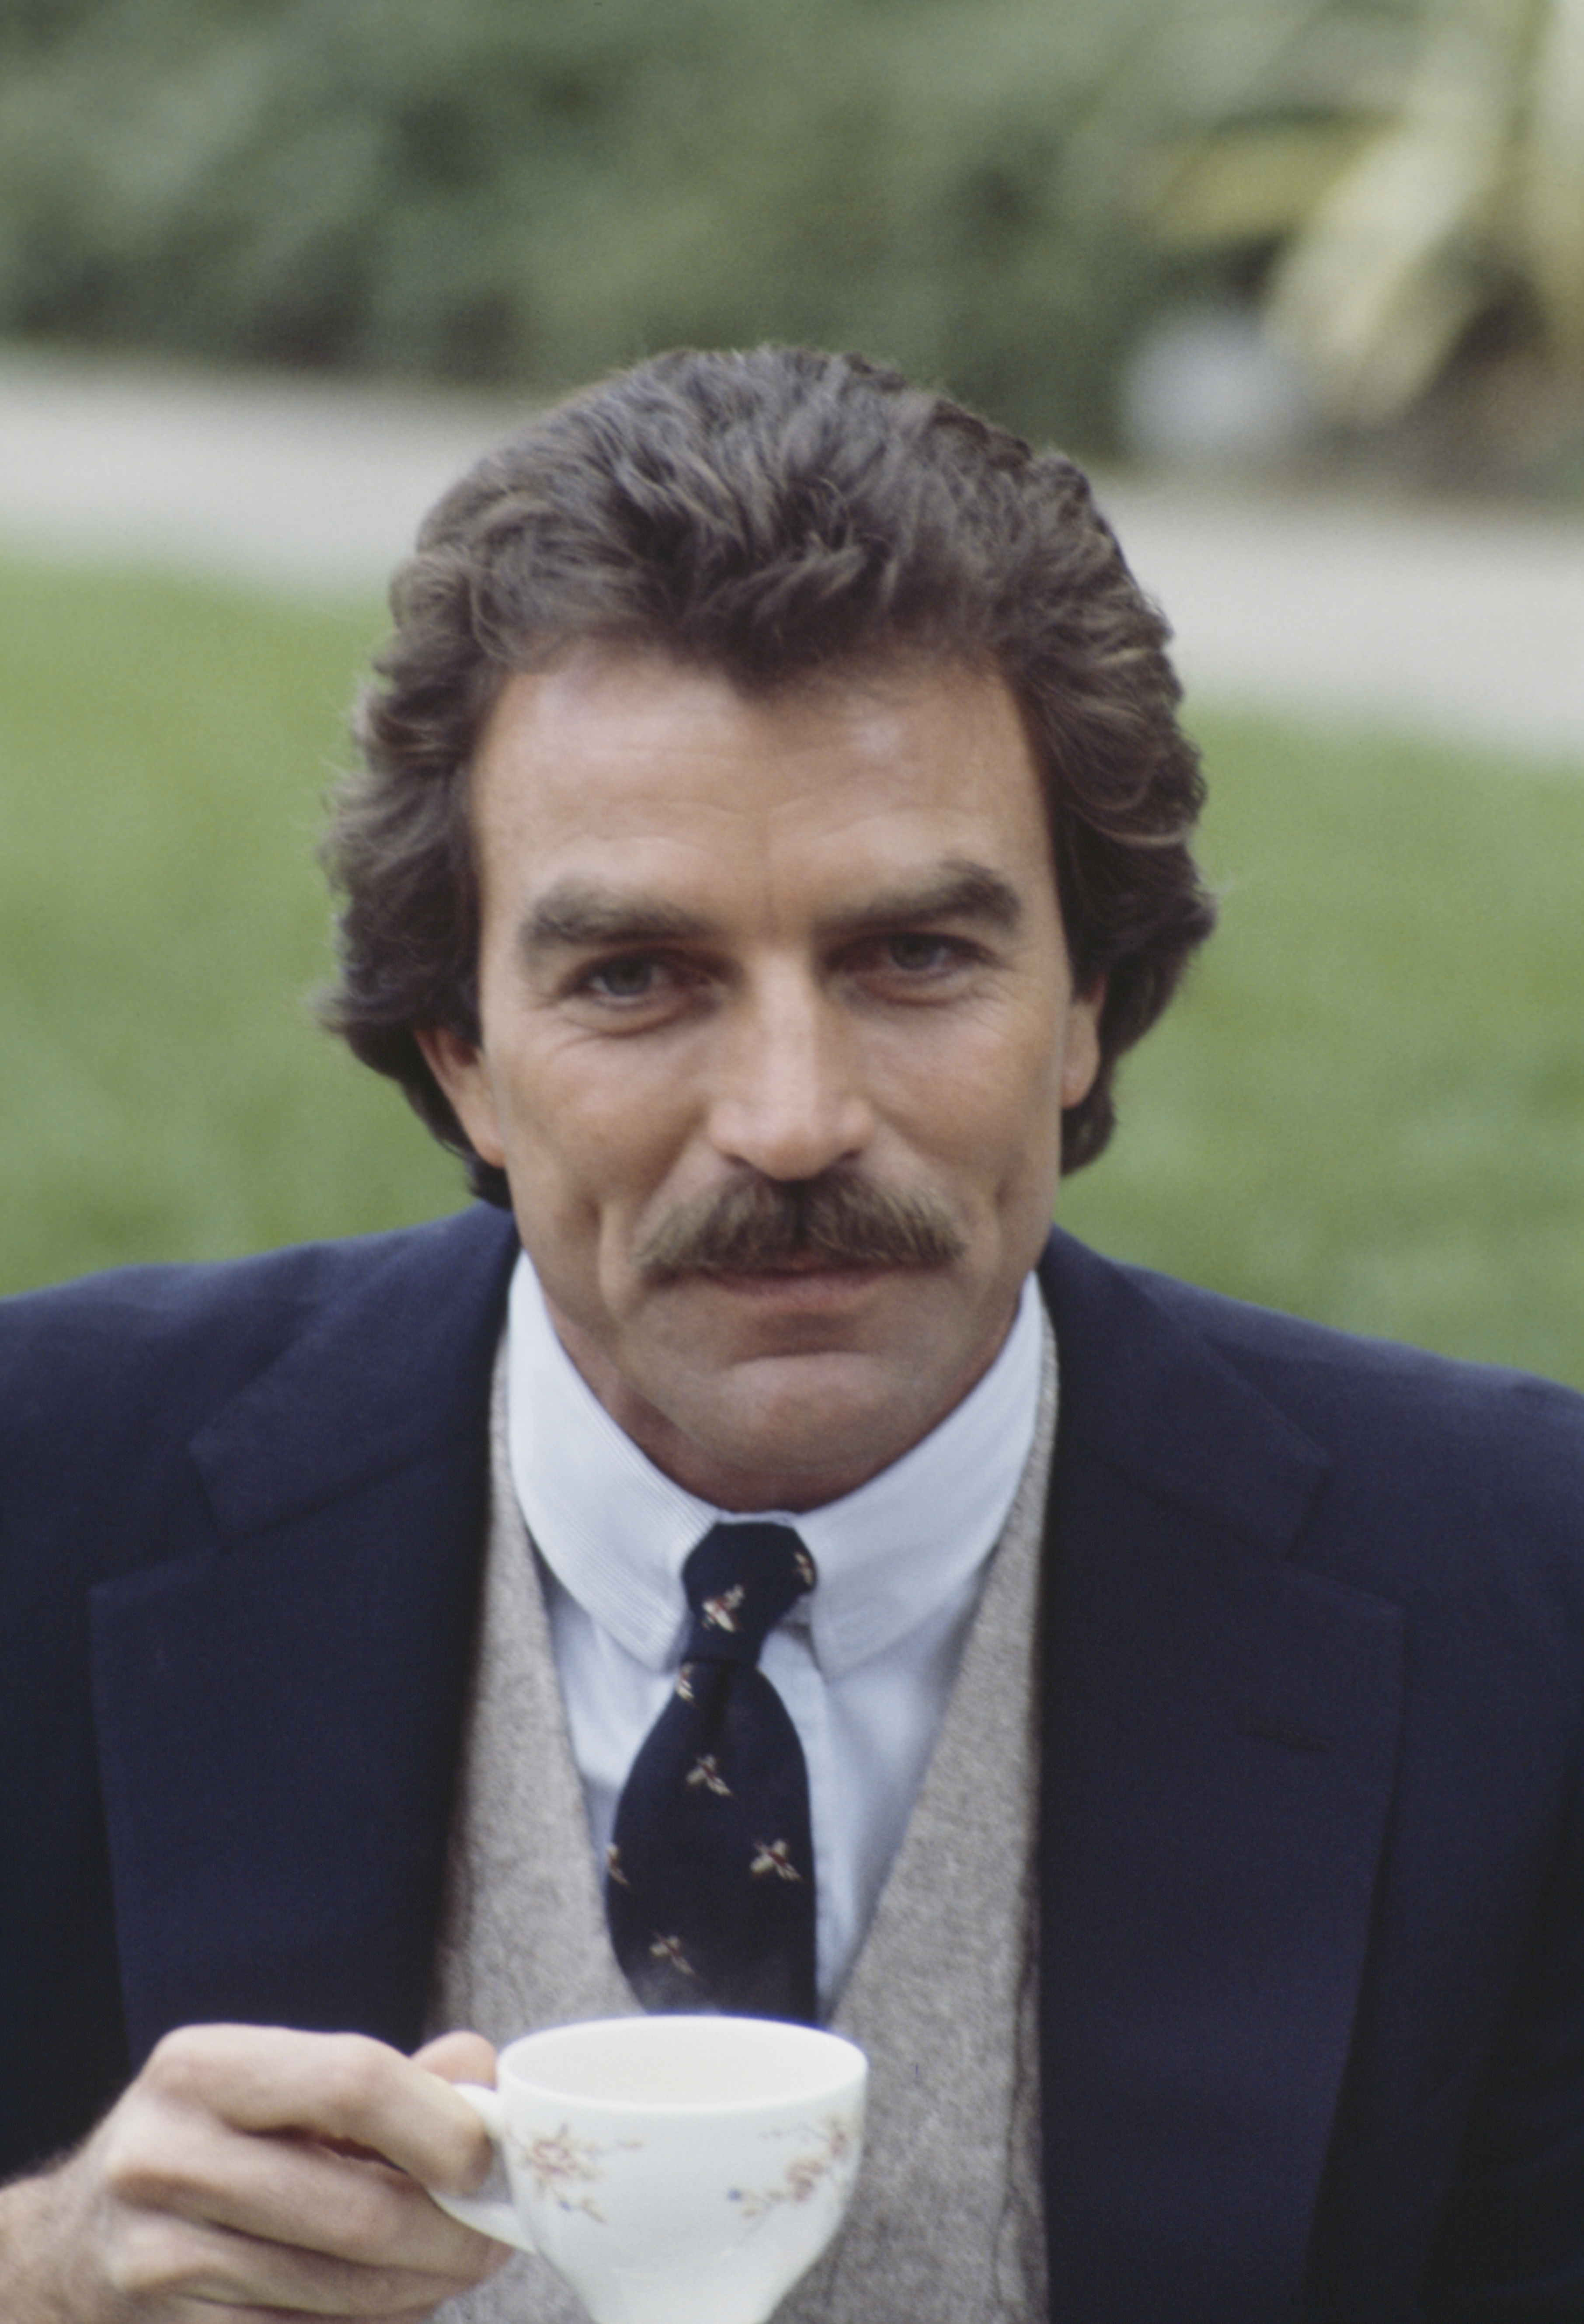 Tom Selleck filming his series 'Magnum PI' in London, England, on May 2, 1985. | Source: Getty Images